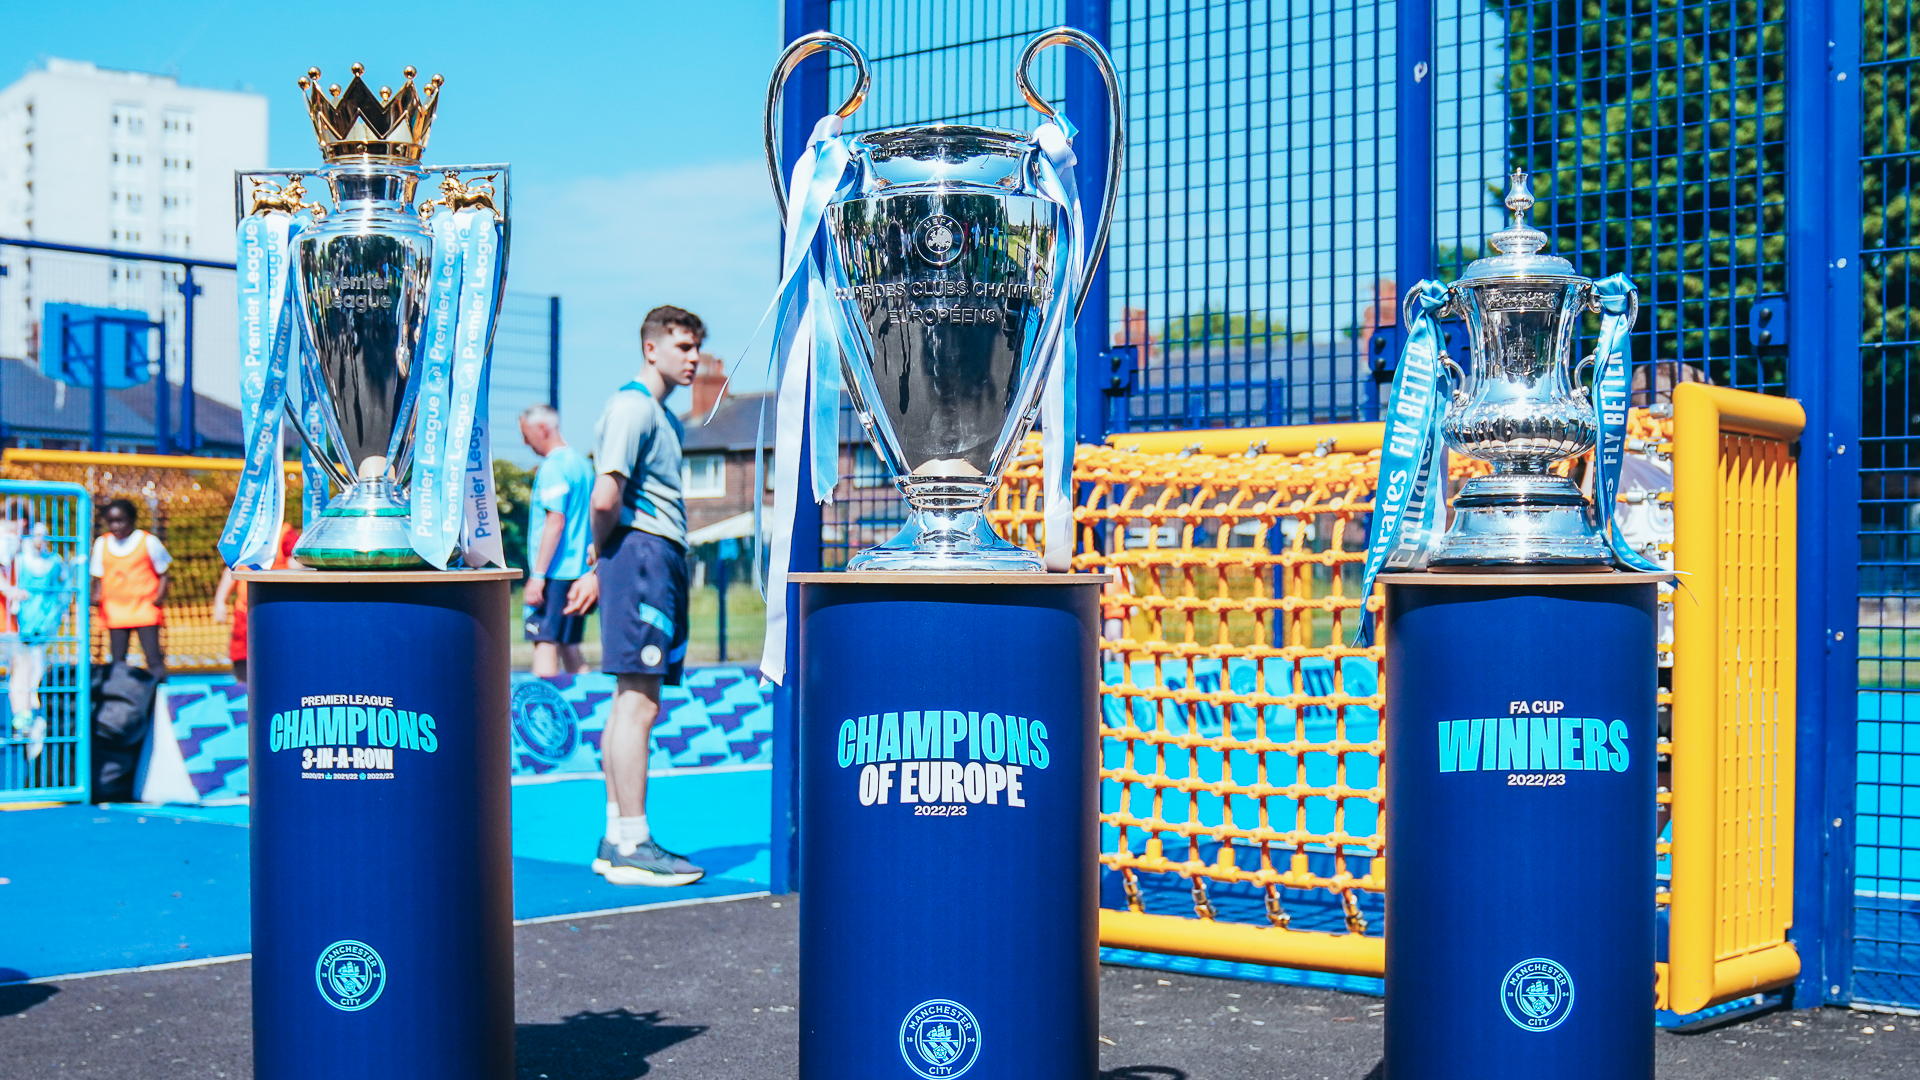 Manchester City debuts Treble trophies at Community event